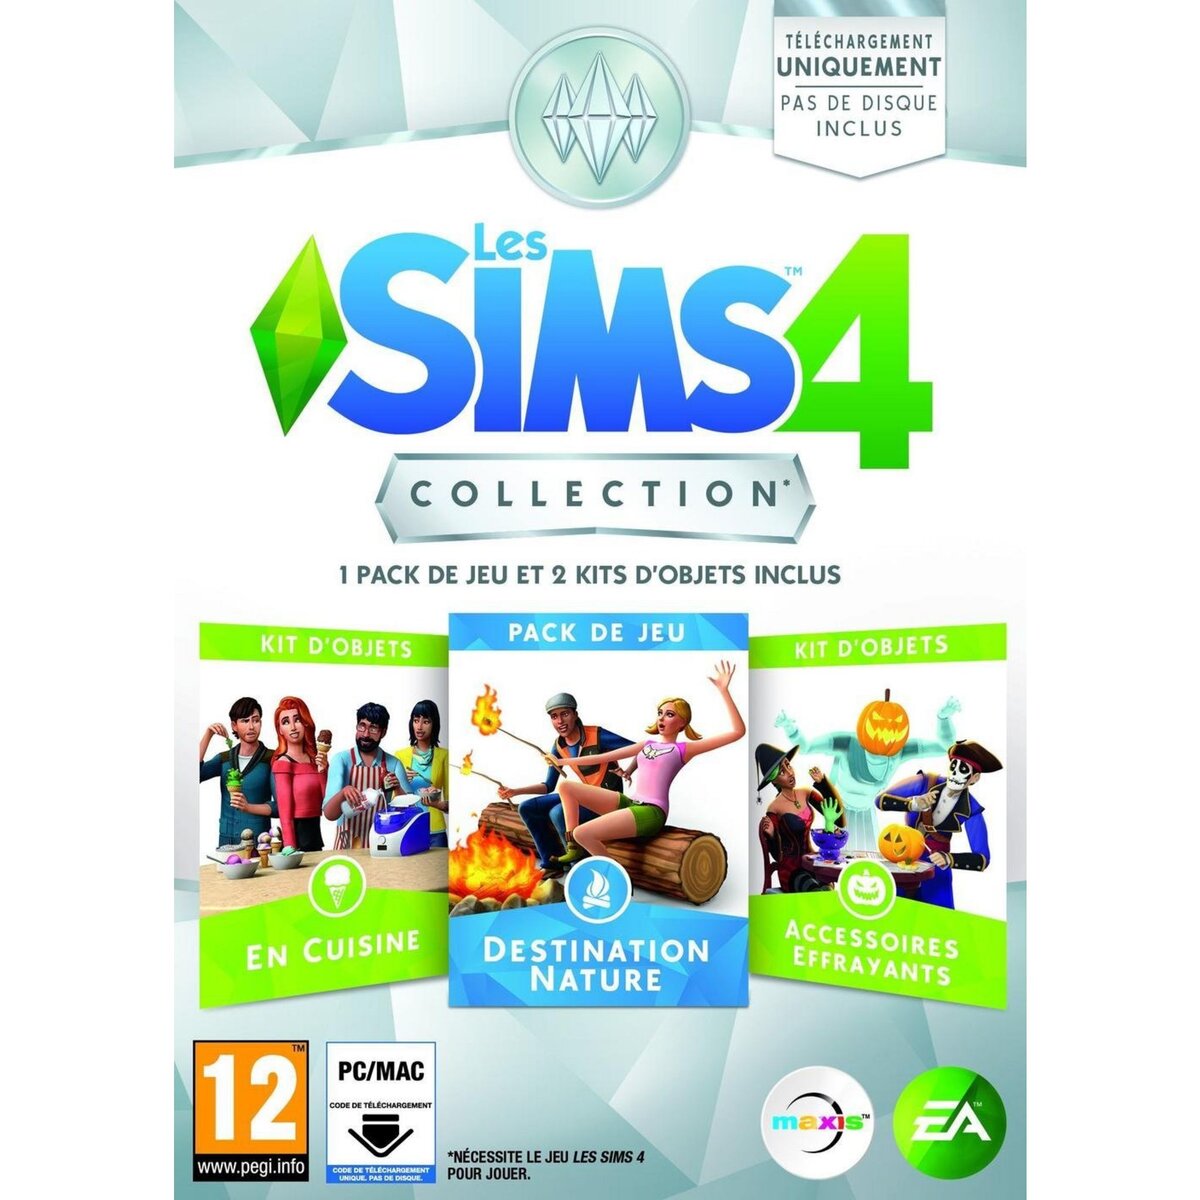 Les Sims 4 Collection 2 - PC